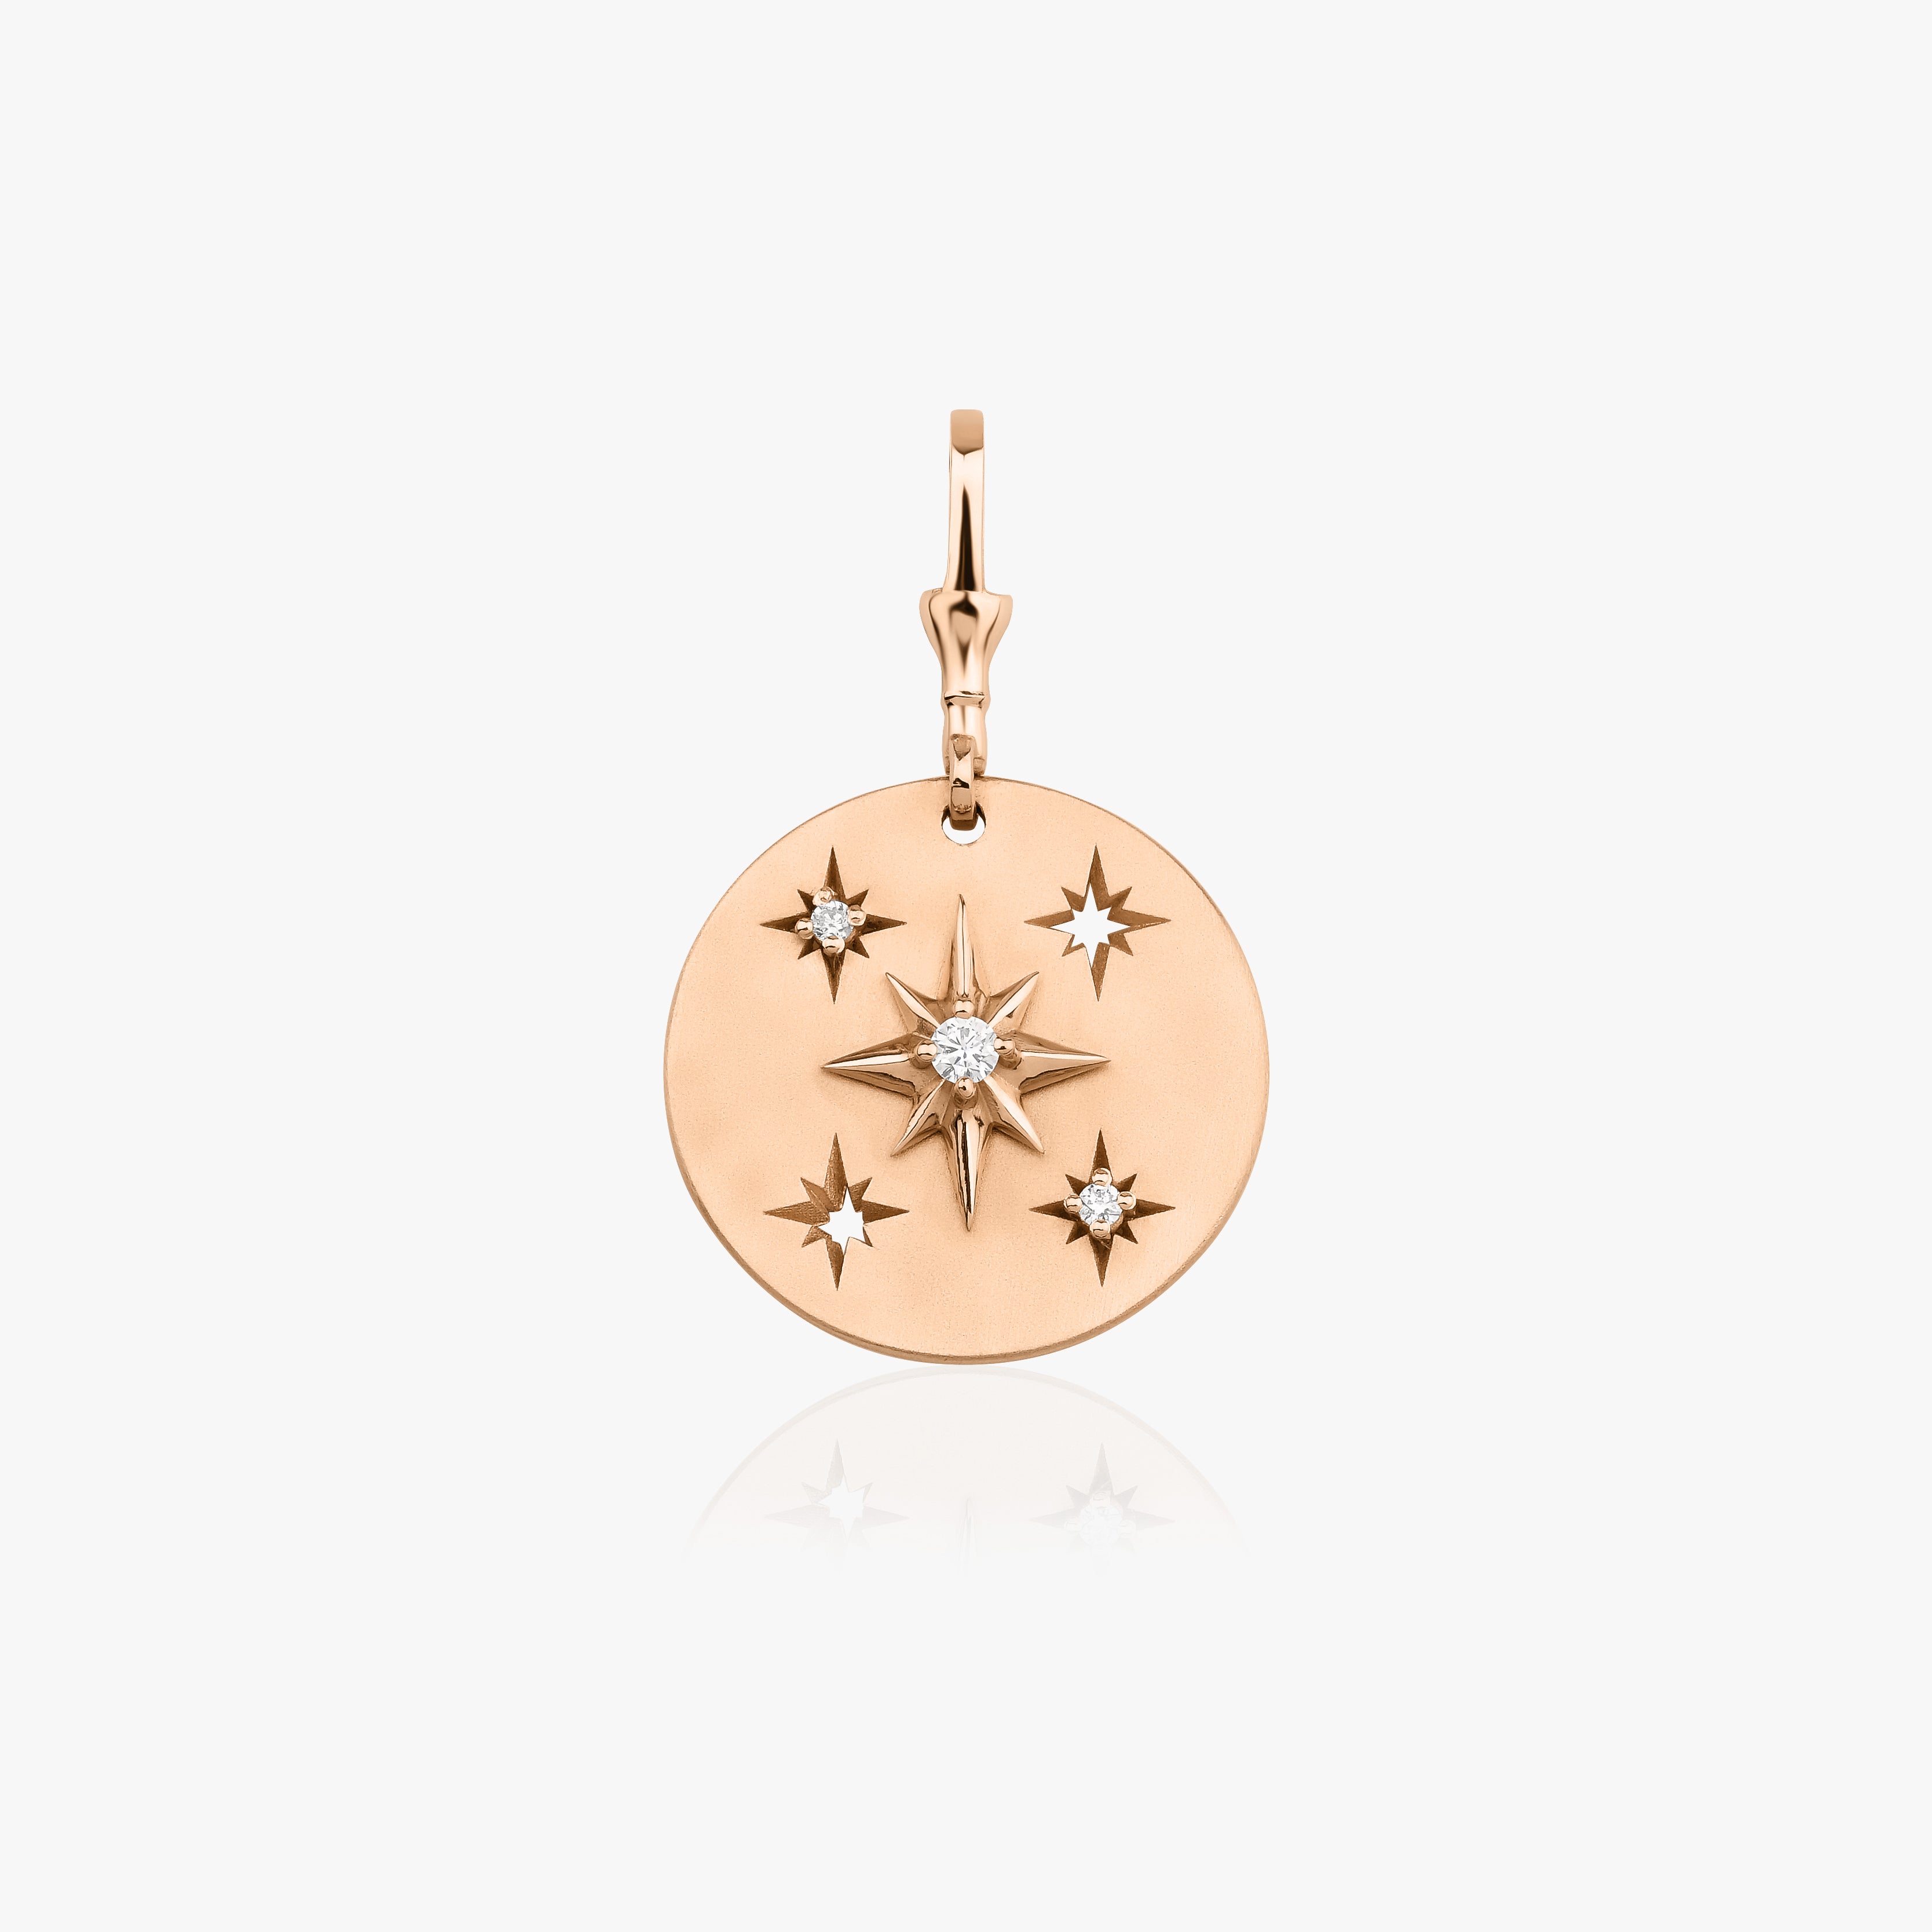 North Star Gold Medallion Pendant Available in 14K and 18K Gold